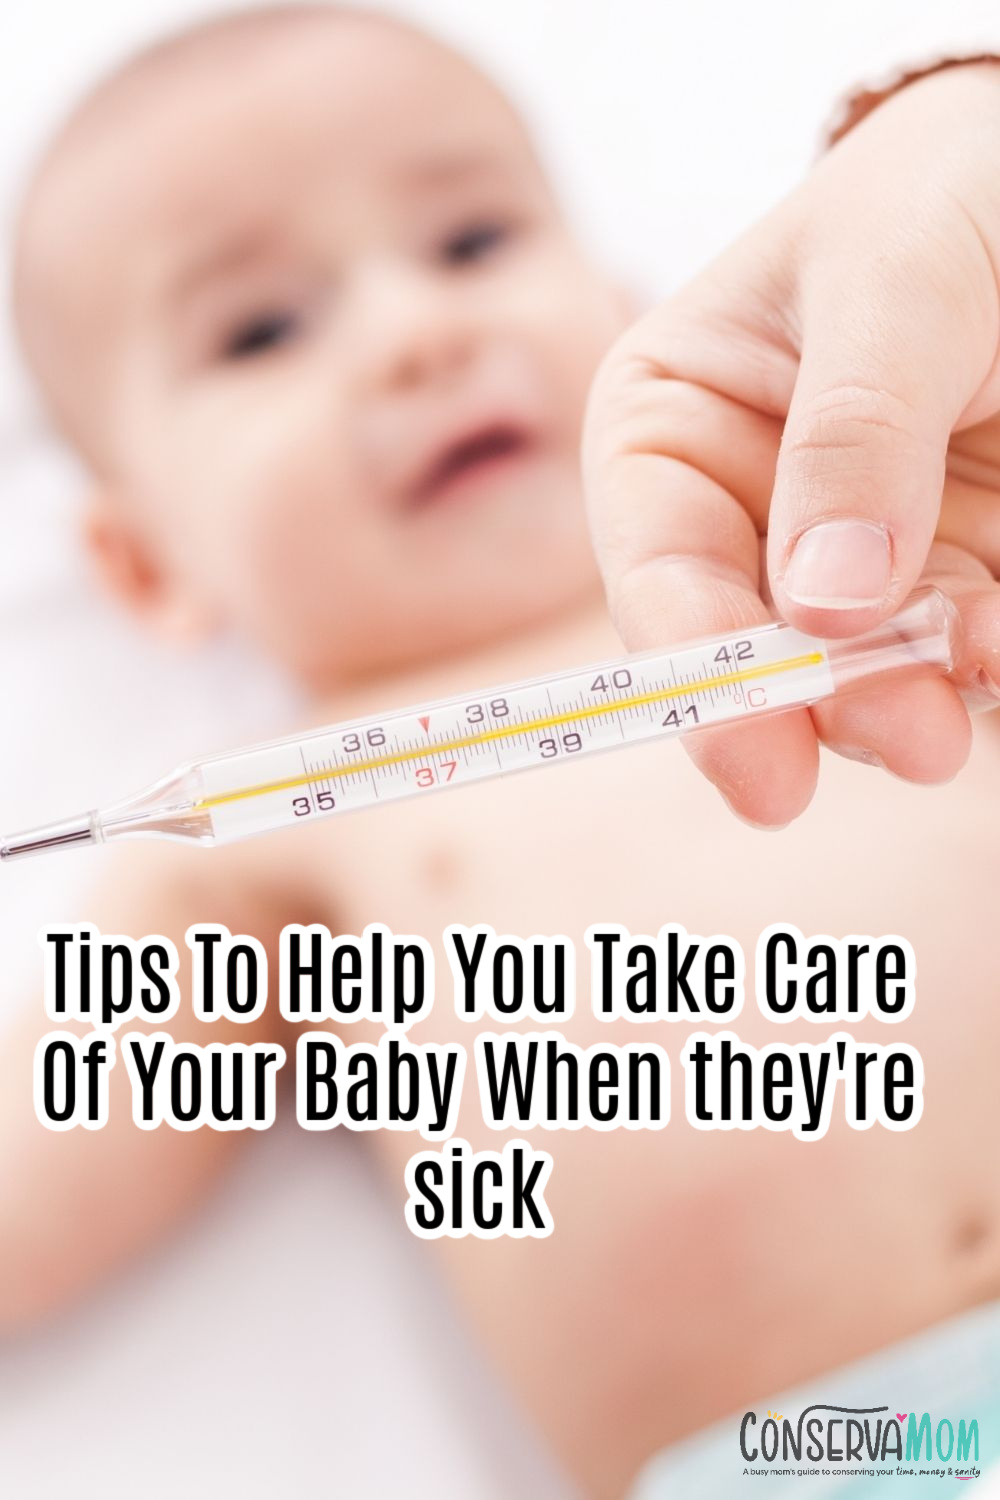 Tips To Help You Take Care Of Your Baby When they're sick